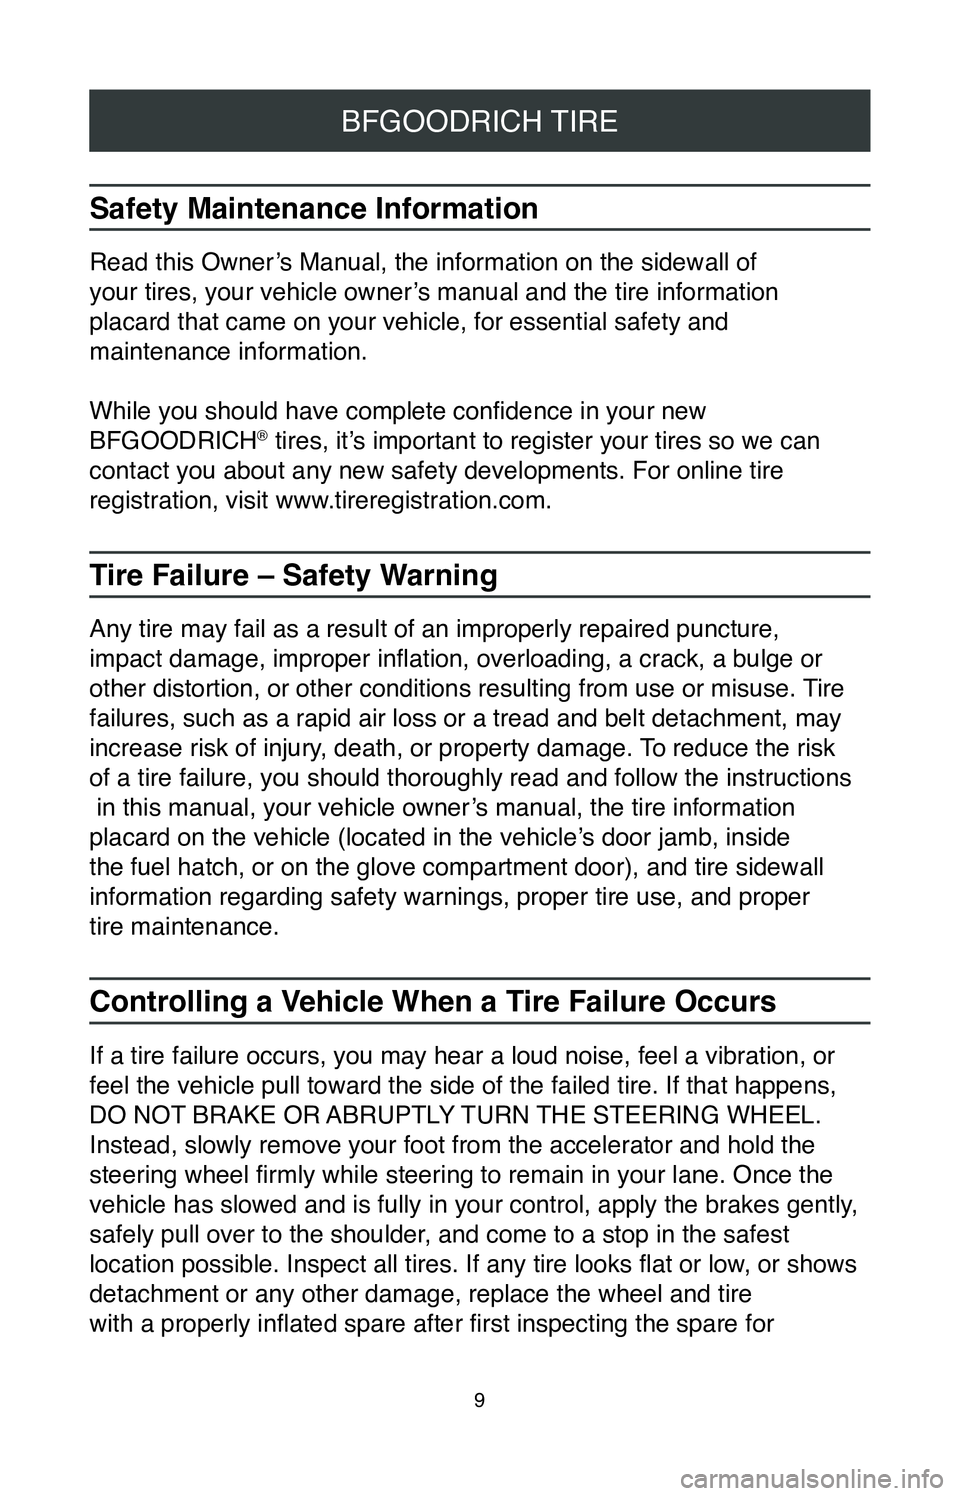 TOYOTA PRIUS PRIME 2020  Warranties & Maintenance Guides (in English) 9
BFGOODRICH TIRE
Safety Maintenance Information
Read this Owner’s Manual, the information on the sidewall of  
your tires, your vehicle owner’s manual and the tire information   
placard that cam